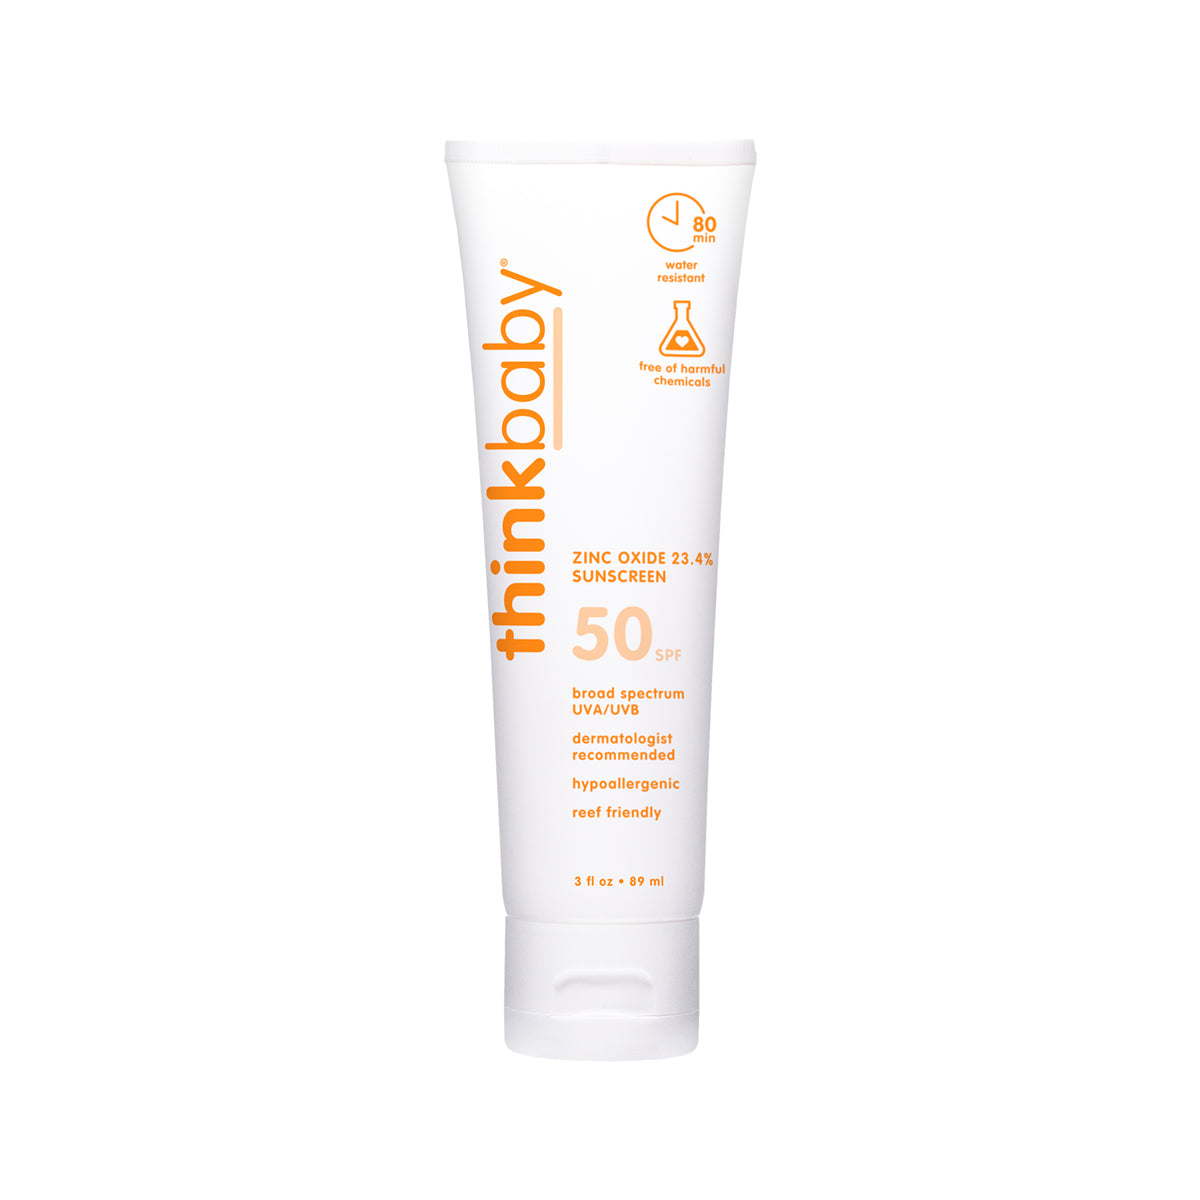 A single Thinkbaby sunscreen tube with broad-spectrum SPF 50, dermatologist recommended, hypoallergenic, and reef-friendly, against a plain white background.